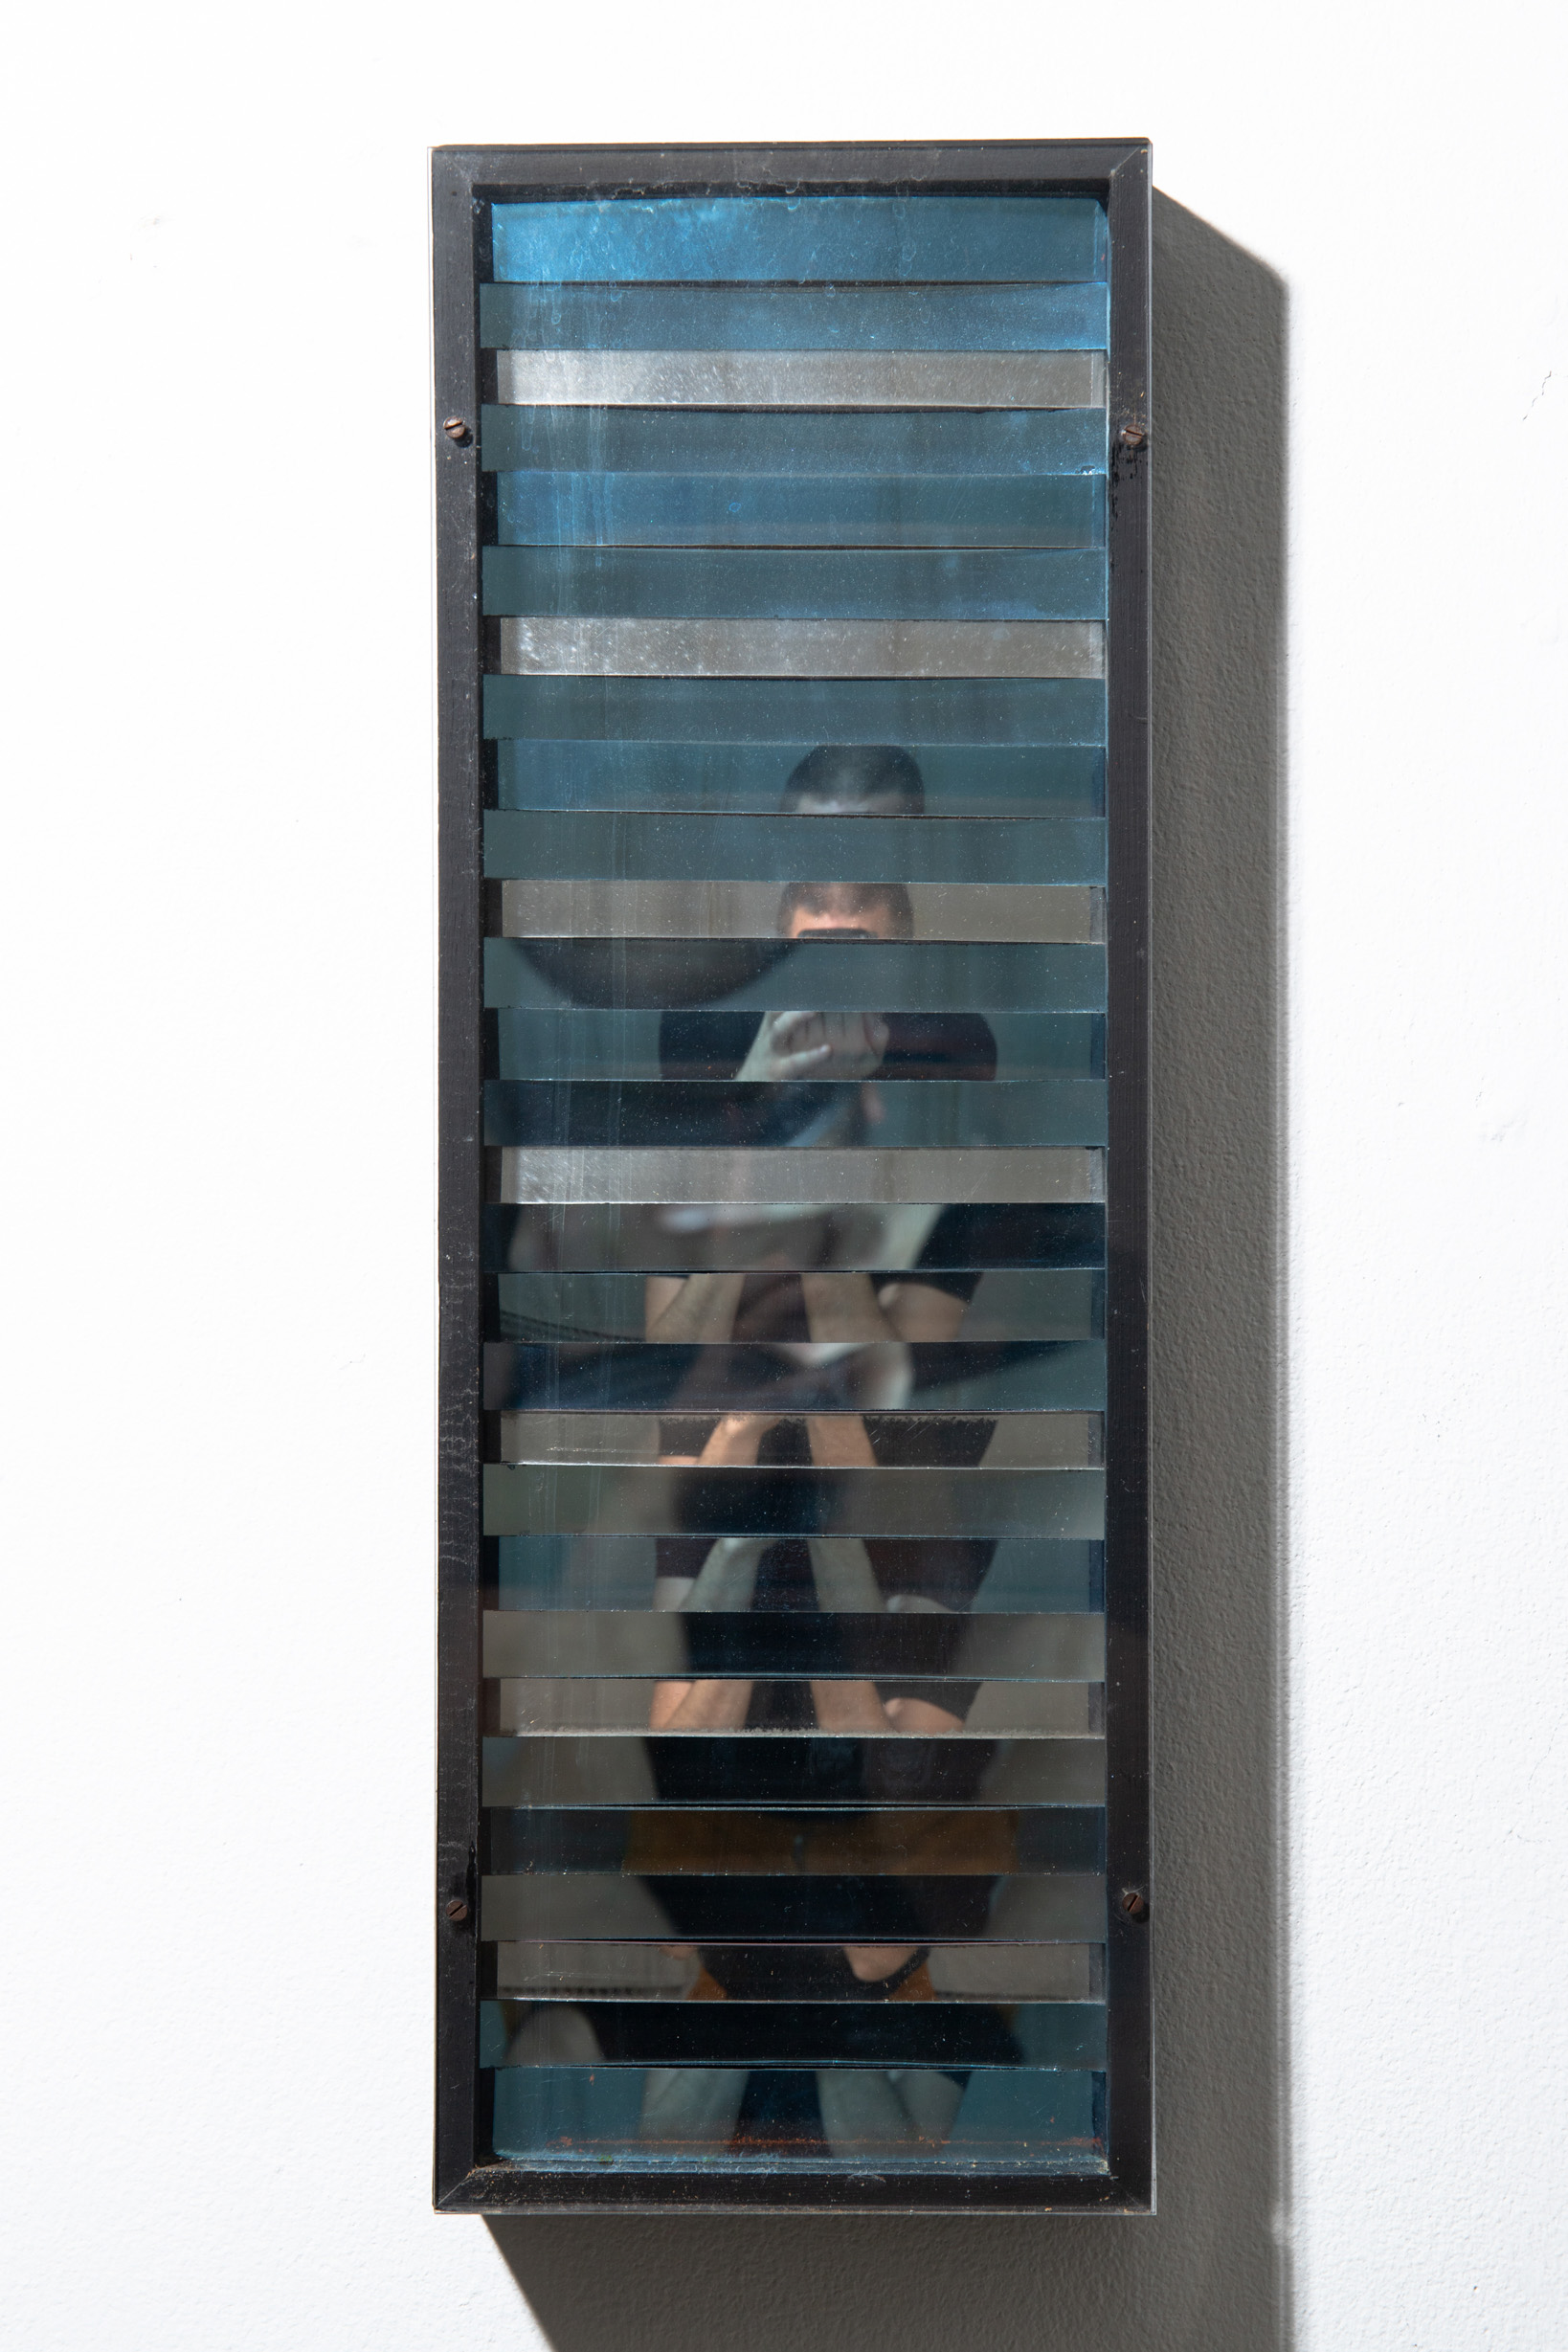 Adolf Luther*, 1975, Mirror object, stripes concave/convex - Image 2 of 6